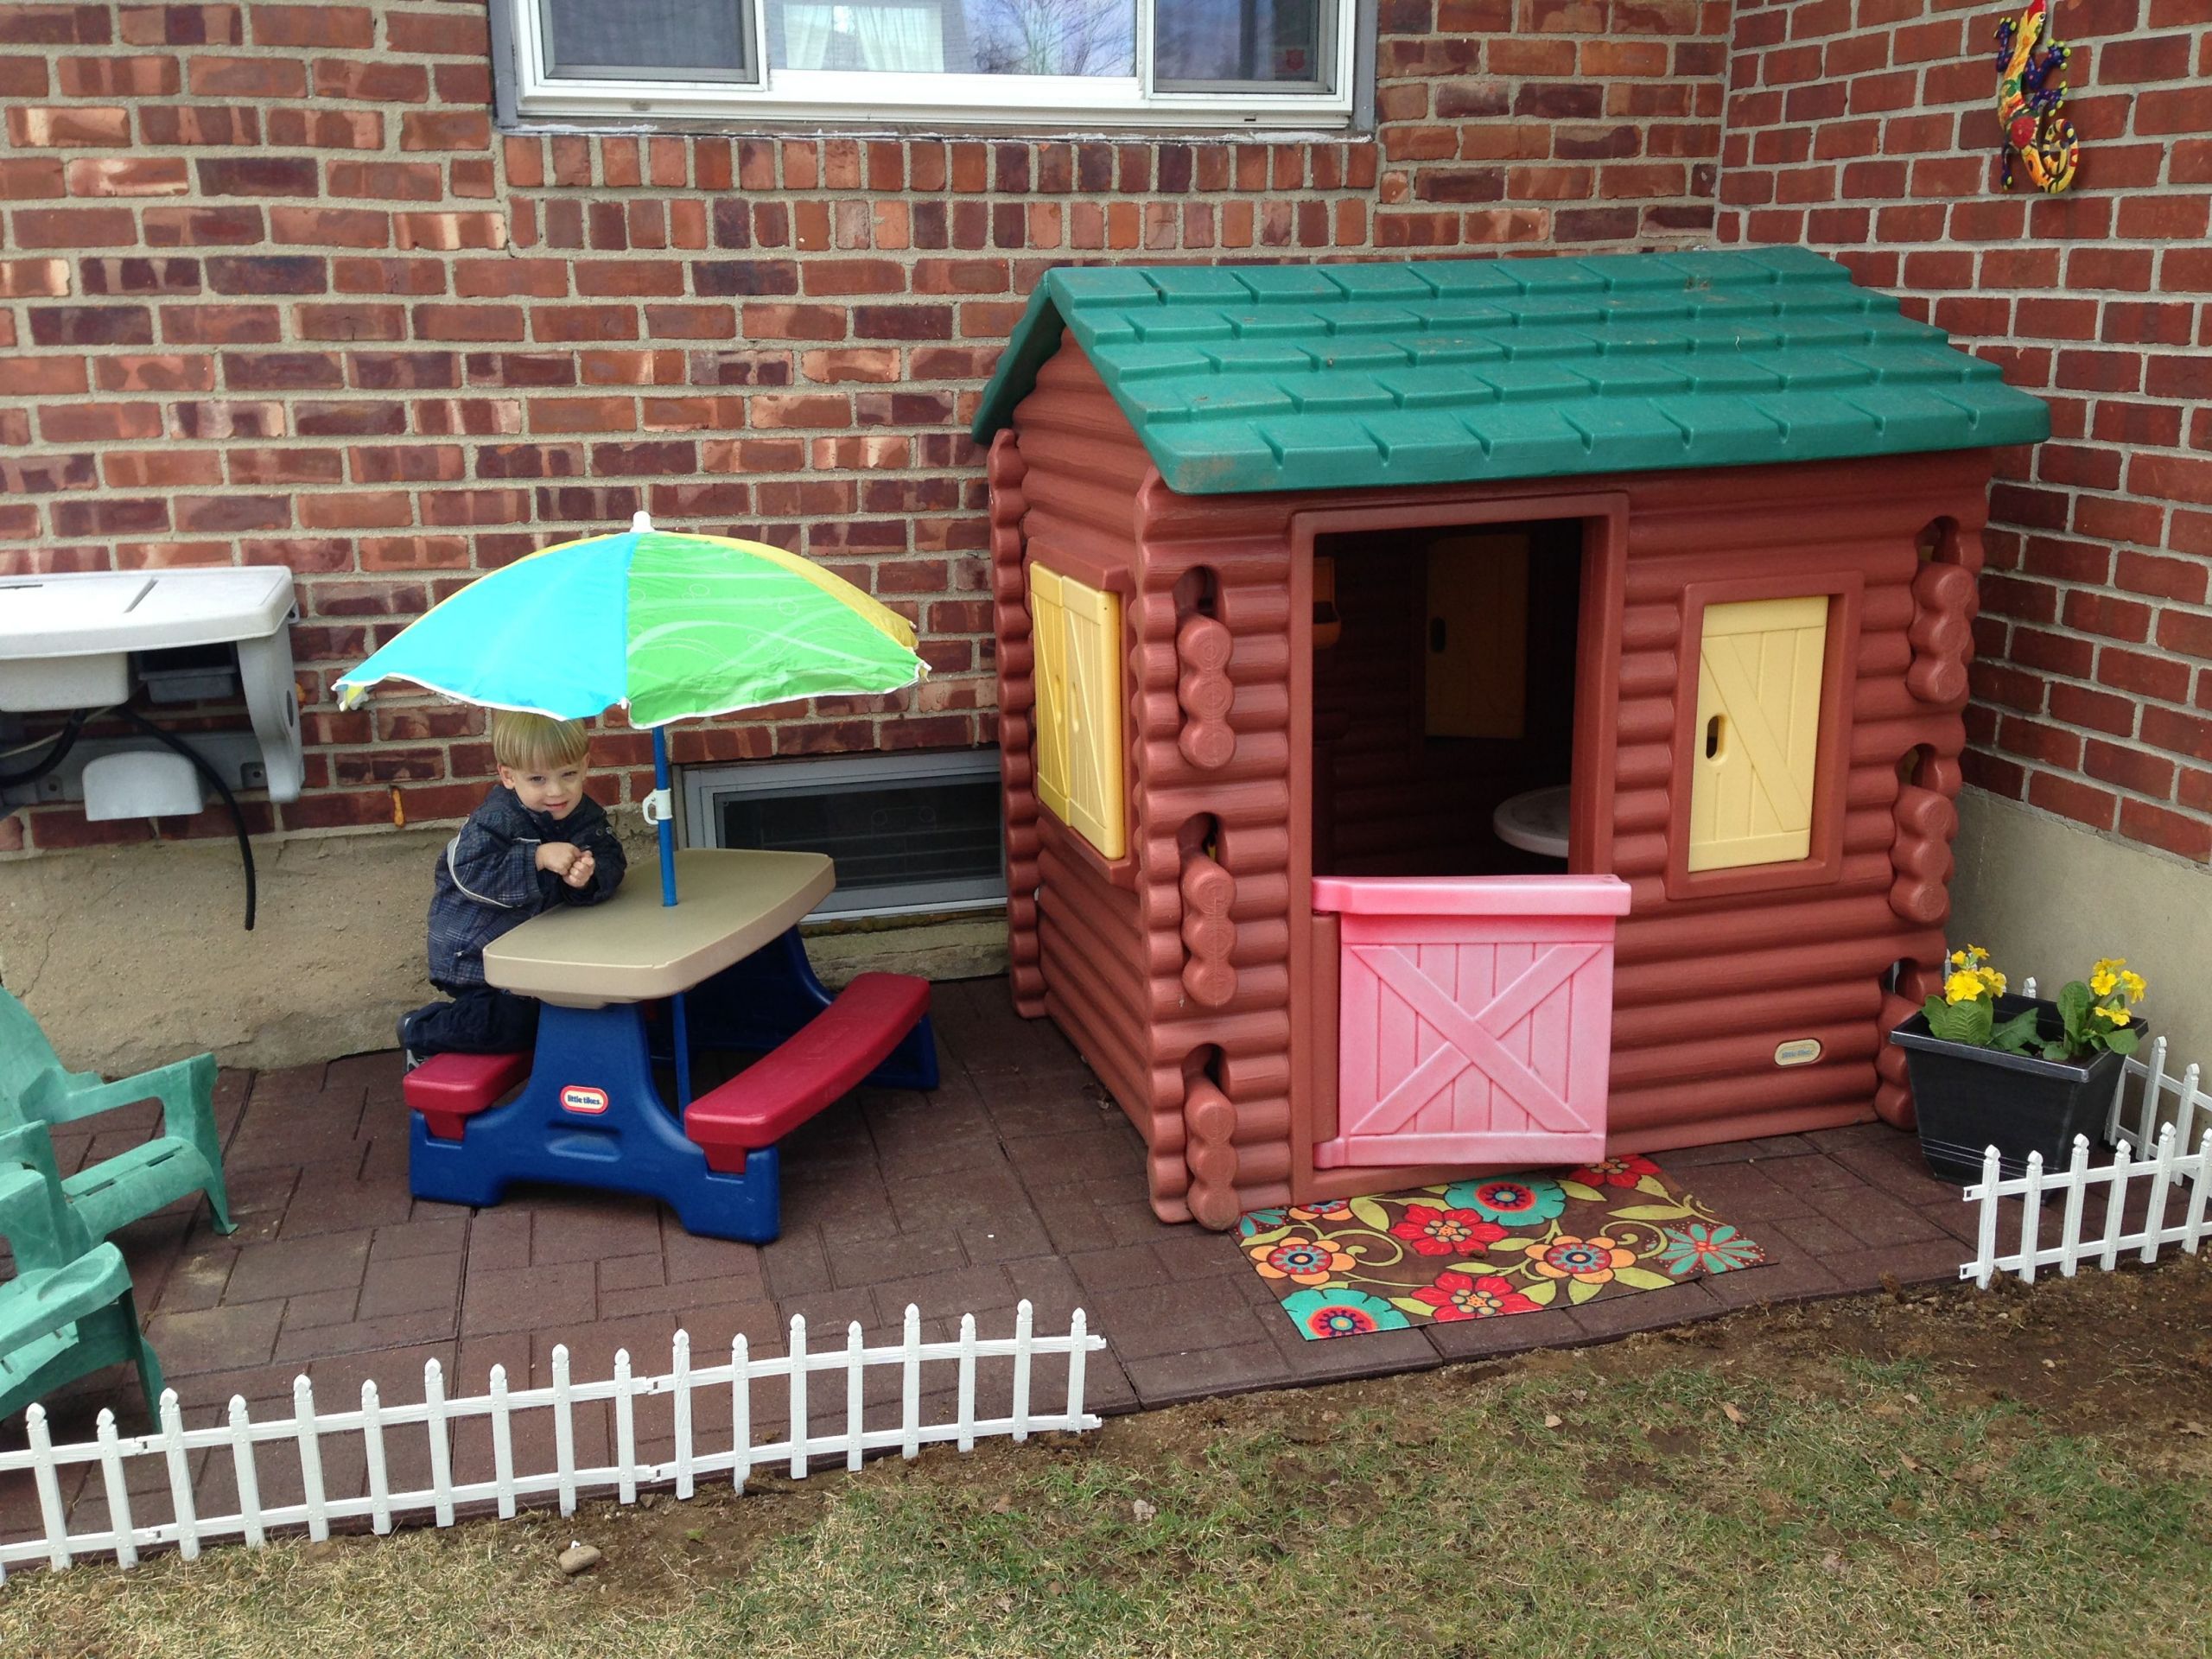 Kids Outdoor Plastic Playhouse
 Playhouse area The stones are recycled rubber tires Home